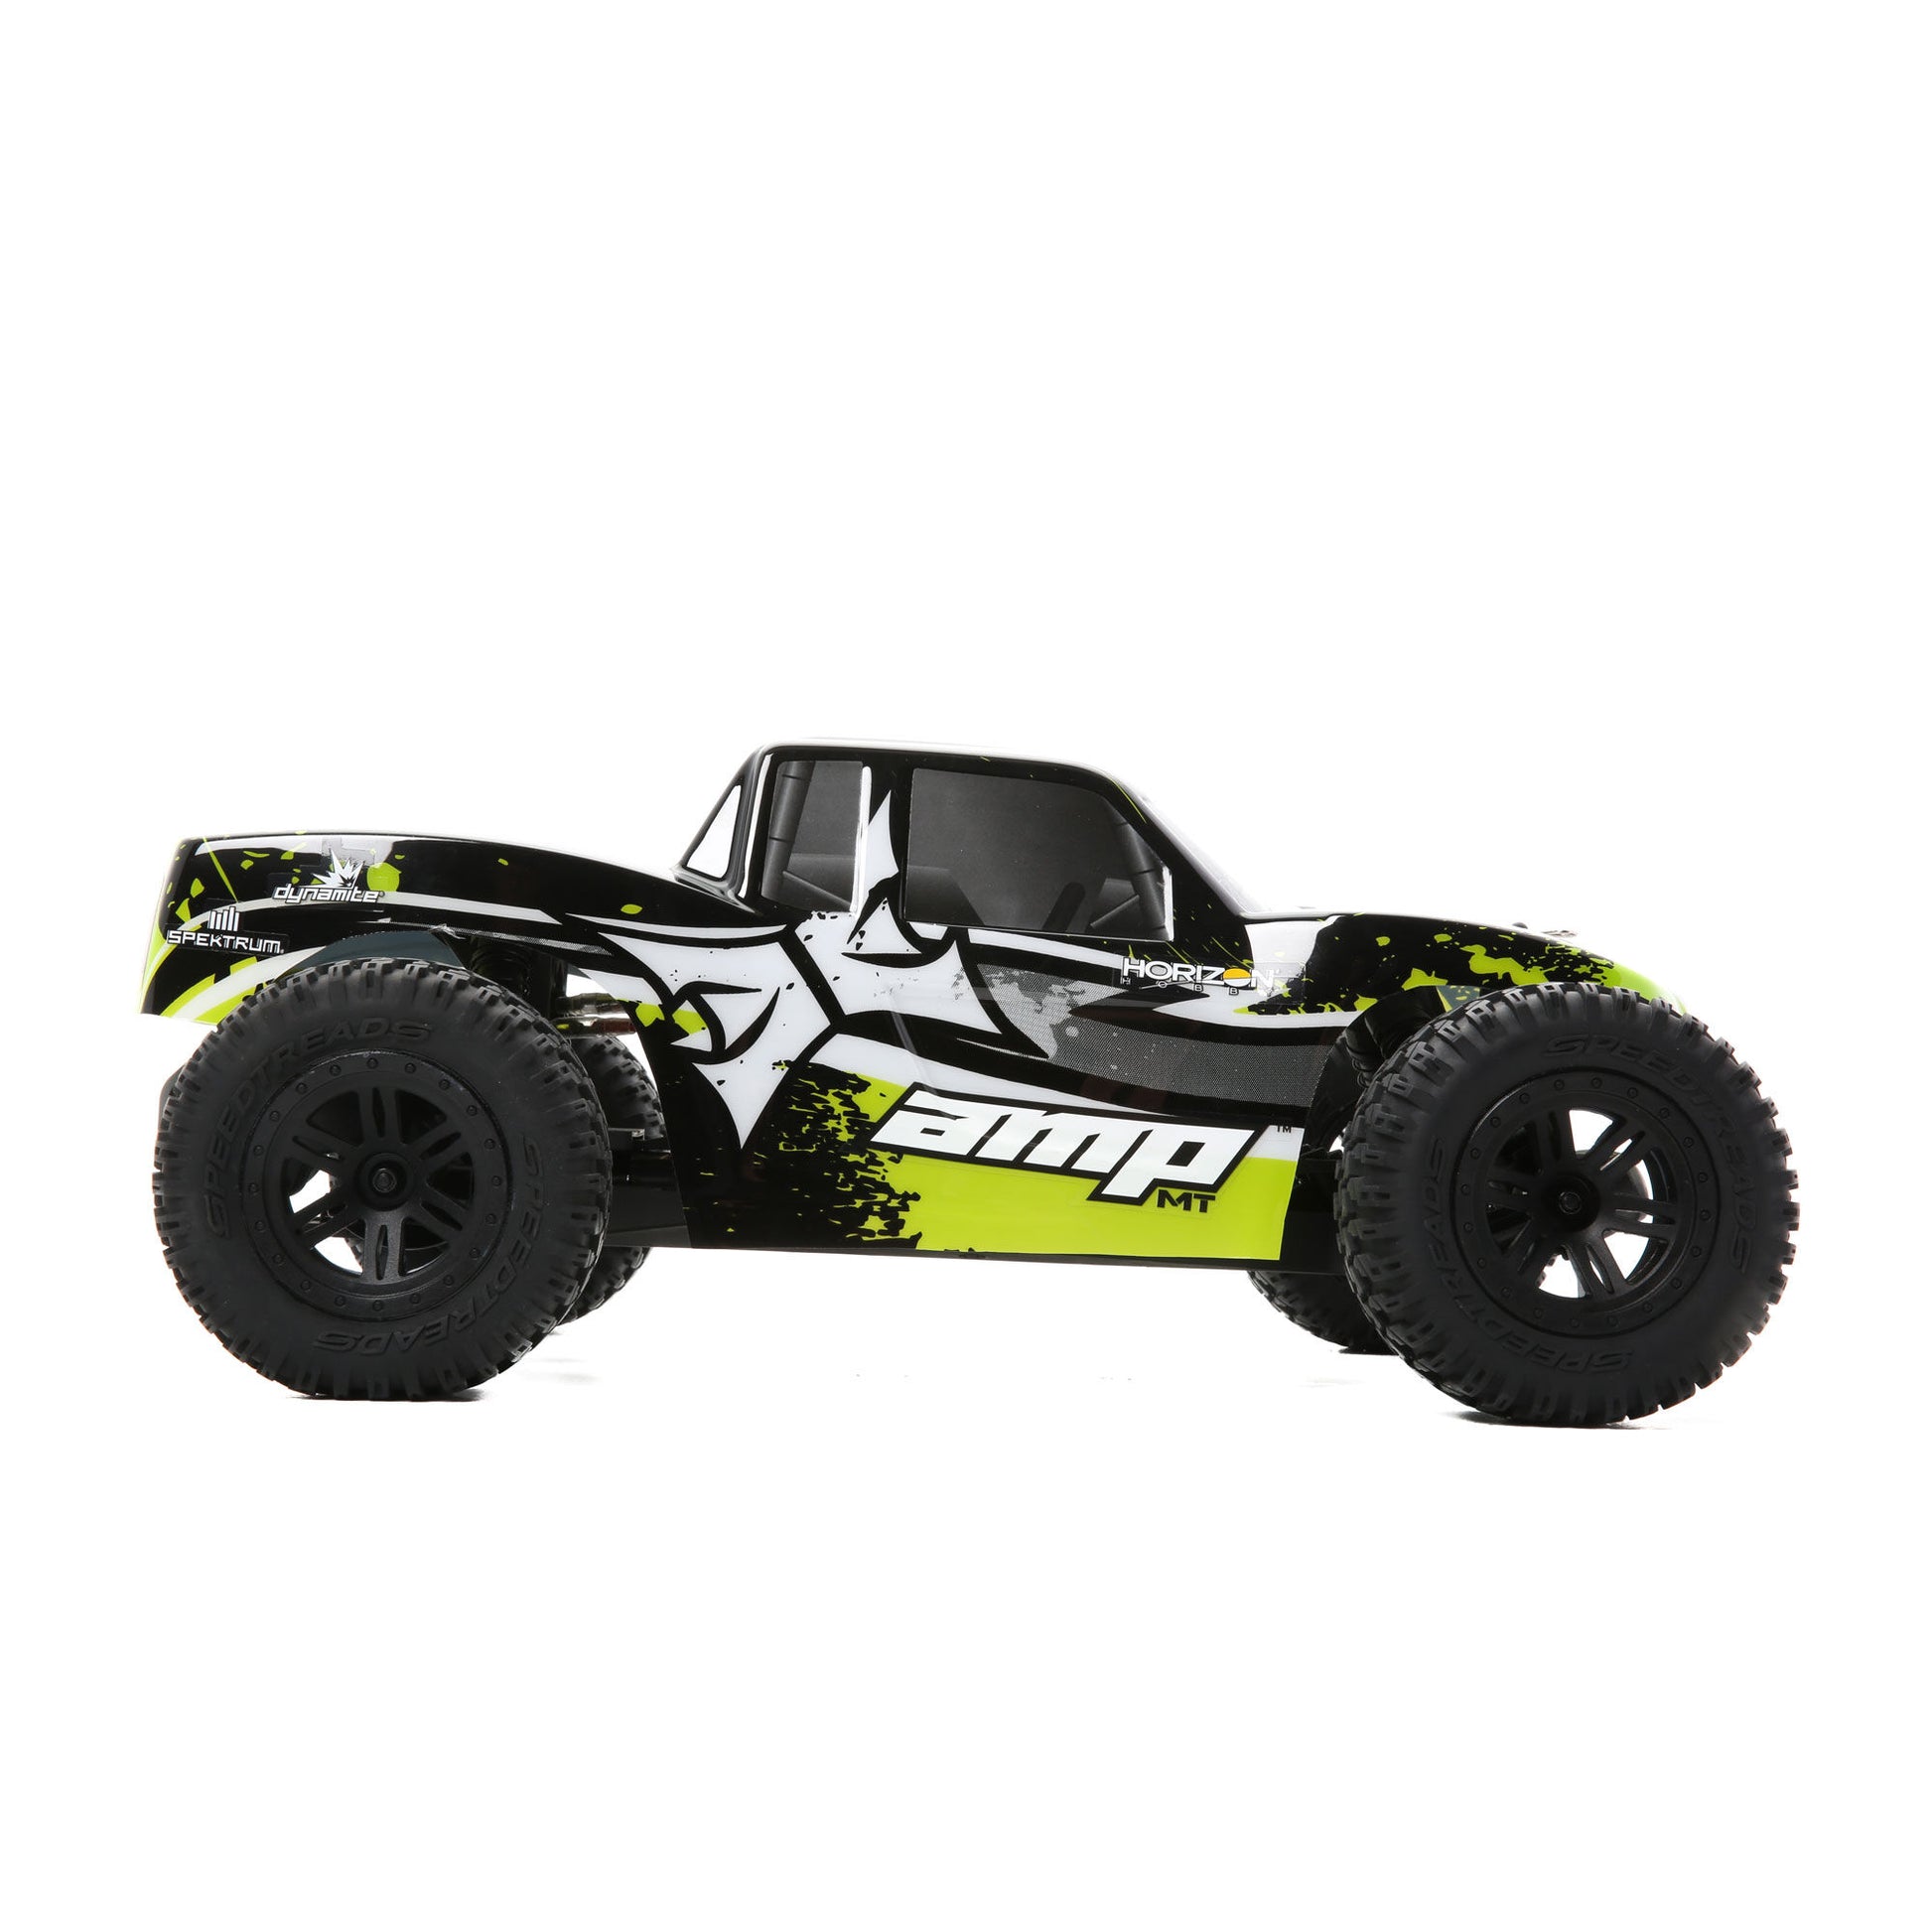 *DISCONTINUED* 1/10 AMP MT 2WD Monster Truck Brushed RTR, Black/Green ECX03028T2